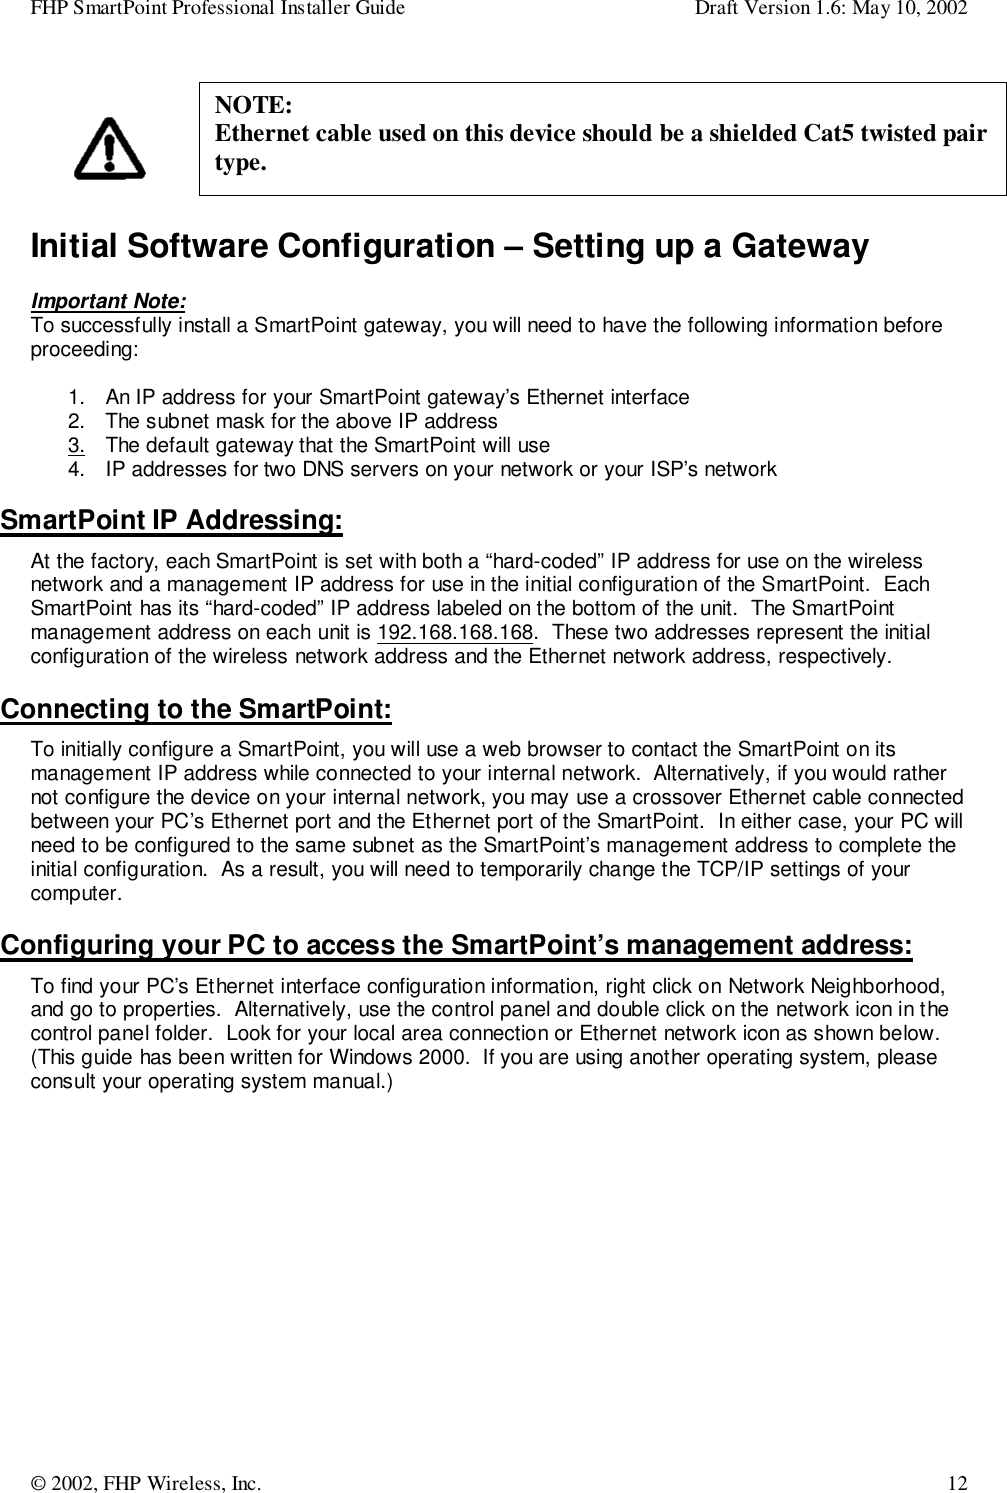 FHP SmartPoint Professional Installer Guide Draft Version 1.6: May 10, 2002© 2002, FHP Wireless, Inc. 12Initial Software Configuration – Setting up a GatewayImportant Note:To successfully install a SmartPoint gateway, you will need to have the following information beforeproceeding:1.  An IP address for your SmartPoint gateway’s Ethernet interface2.  The subnet mask for the above IP address3.  The default gateway that the SmartPoint will use4.  IP addresses for two DNS servers on your network or your ISP’s networkSmartPoint IP Addressing:At the factory, each SmartPoint is set with both a “hard-coded” IP address for use on the wirelessnetwork and a management IP address for use in the initial configuration of the SmartPoint.  EachSmartPoint has its “hard-coded” IP address labeled on the bottom of the unit.  The SmartPointmanagement address on each unit is 192.168.168.168.  These two addresses represent the initialconfiguration of the wireless network address and the Ethernet network address, respectively.Connecting to the SmartPoint:To initially configure a SmartPoint, you will use a web browser to contact the SmartPoint on itsmanagement IP address while connected to your internal network.  Alternatively, if you would rathernot configure the device on your internal network, you may use a crossover Ethernet cable connectedbetween your PC’s Ethernet port and the Ethernet port of the SmartPoint.  In either case, your PC willneed to be configured to the same subnet as the SmartPoint’s management address to complete theinitial configuration.  As a result, you will need to temporarily change the TCP/IP settings of yourcomputer.Configuring your PC to access the SmartPoint’s management address:To find your PC’s Ethernet interface configuration information, right click on Network Neighborhood,and go to properties.  Alternatively, use the control panel and double click on the network icon in thecontrol panel folder.  Look for your local area connection or Ethernet network icon as shown below.(This guide has been written for Windows 2000.  If you are using another operating system, pleaseconsult your operating system manual.)NOTE:Ethernet cable used on this device should be a shielded Cat5 twisted pairtype.